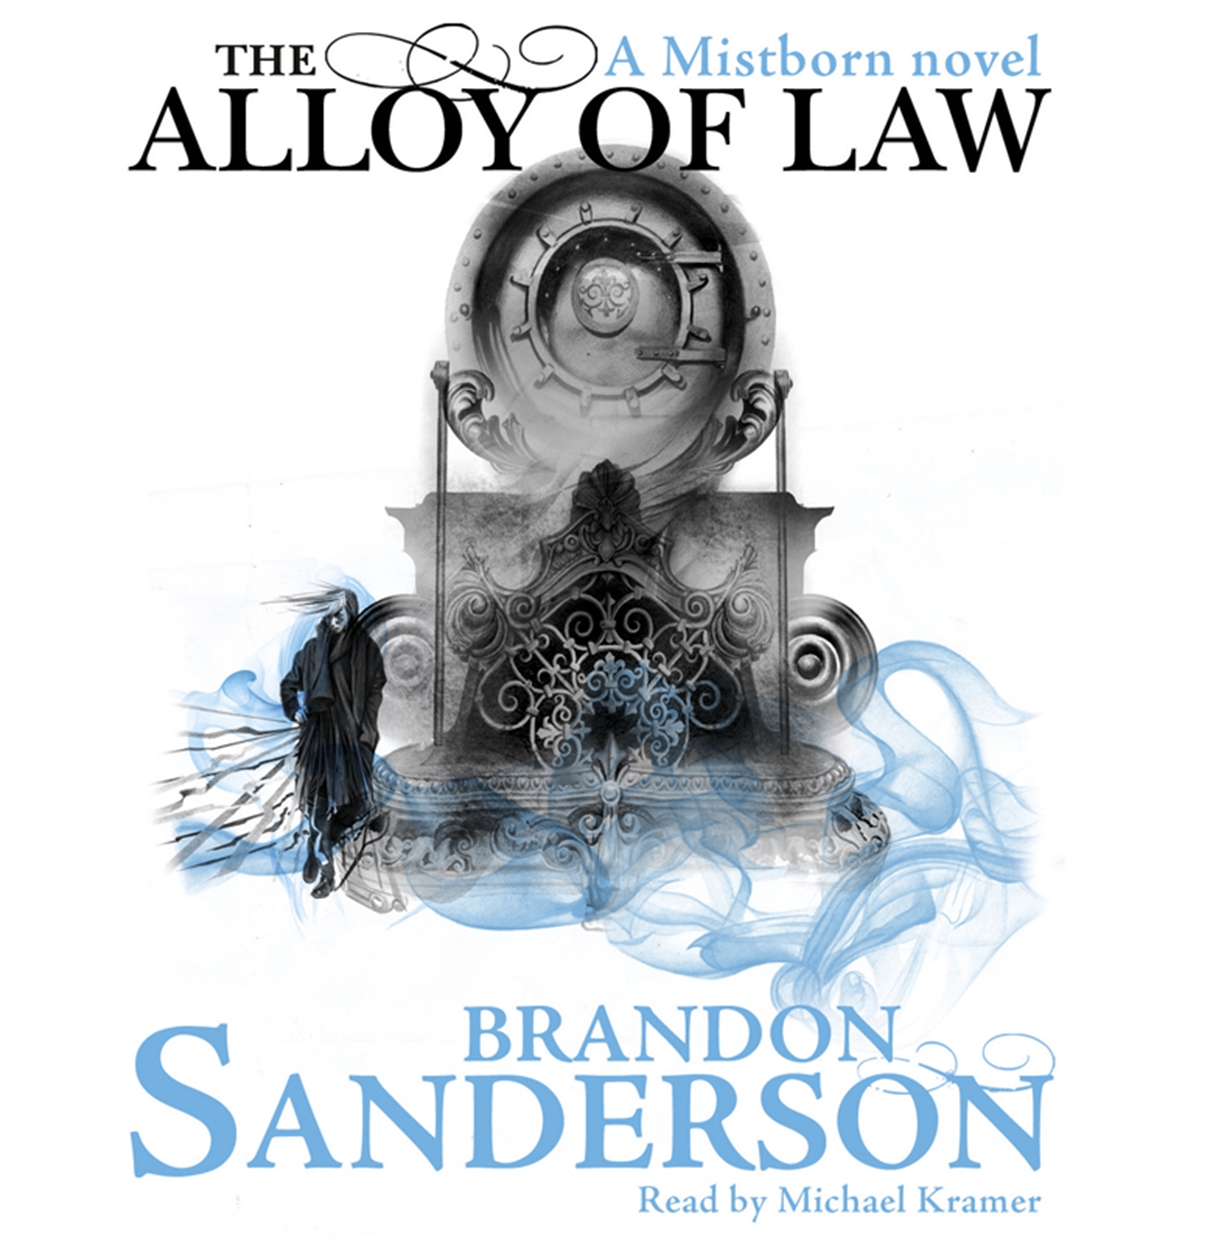 the alloy of law by brandon sanderson